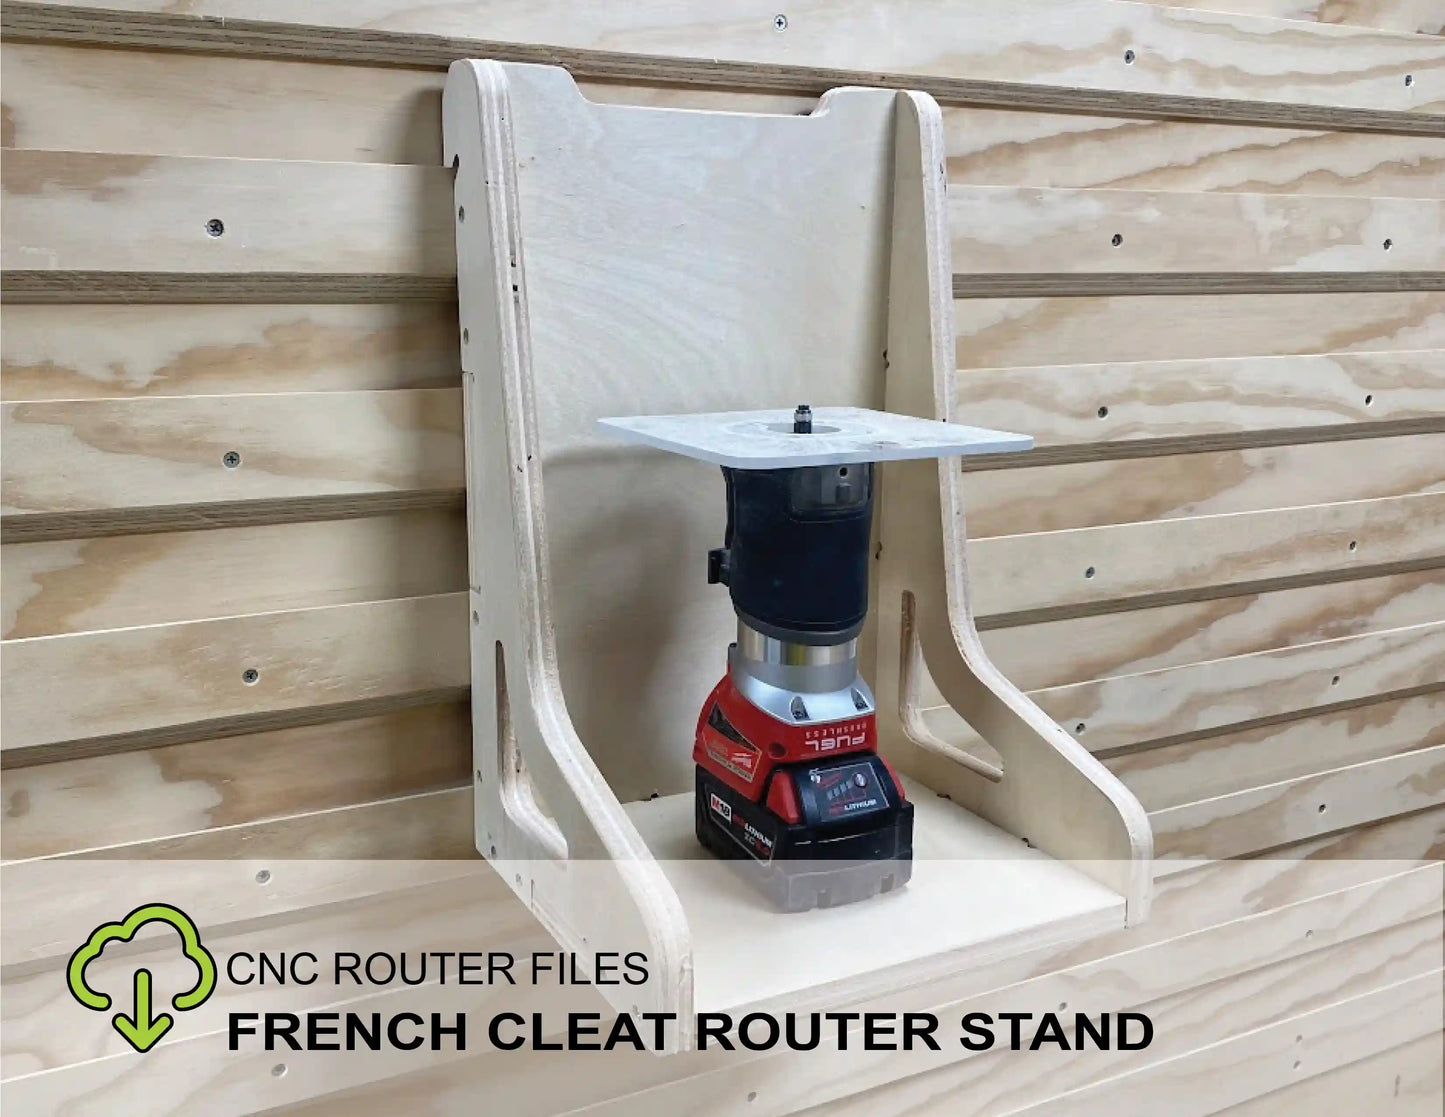 CNC Router Files French Cleat Router Stand Shelf